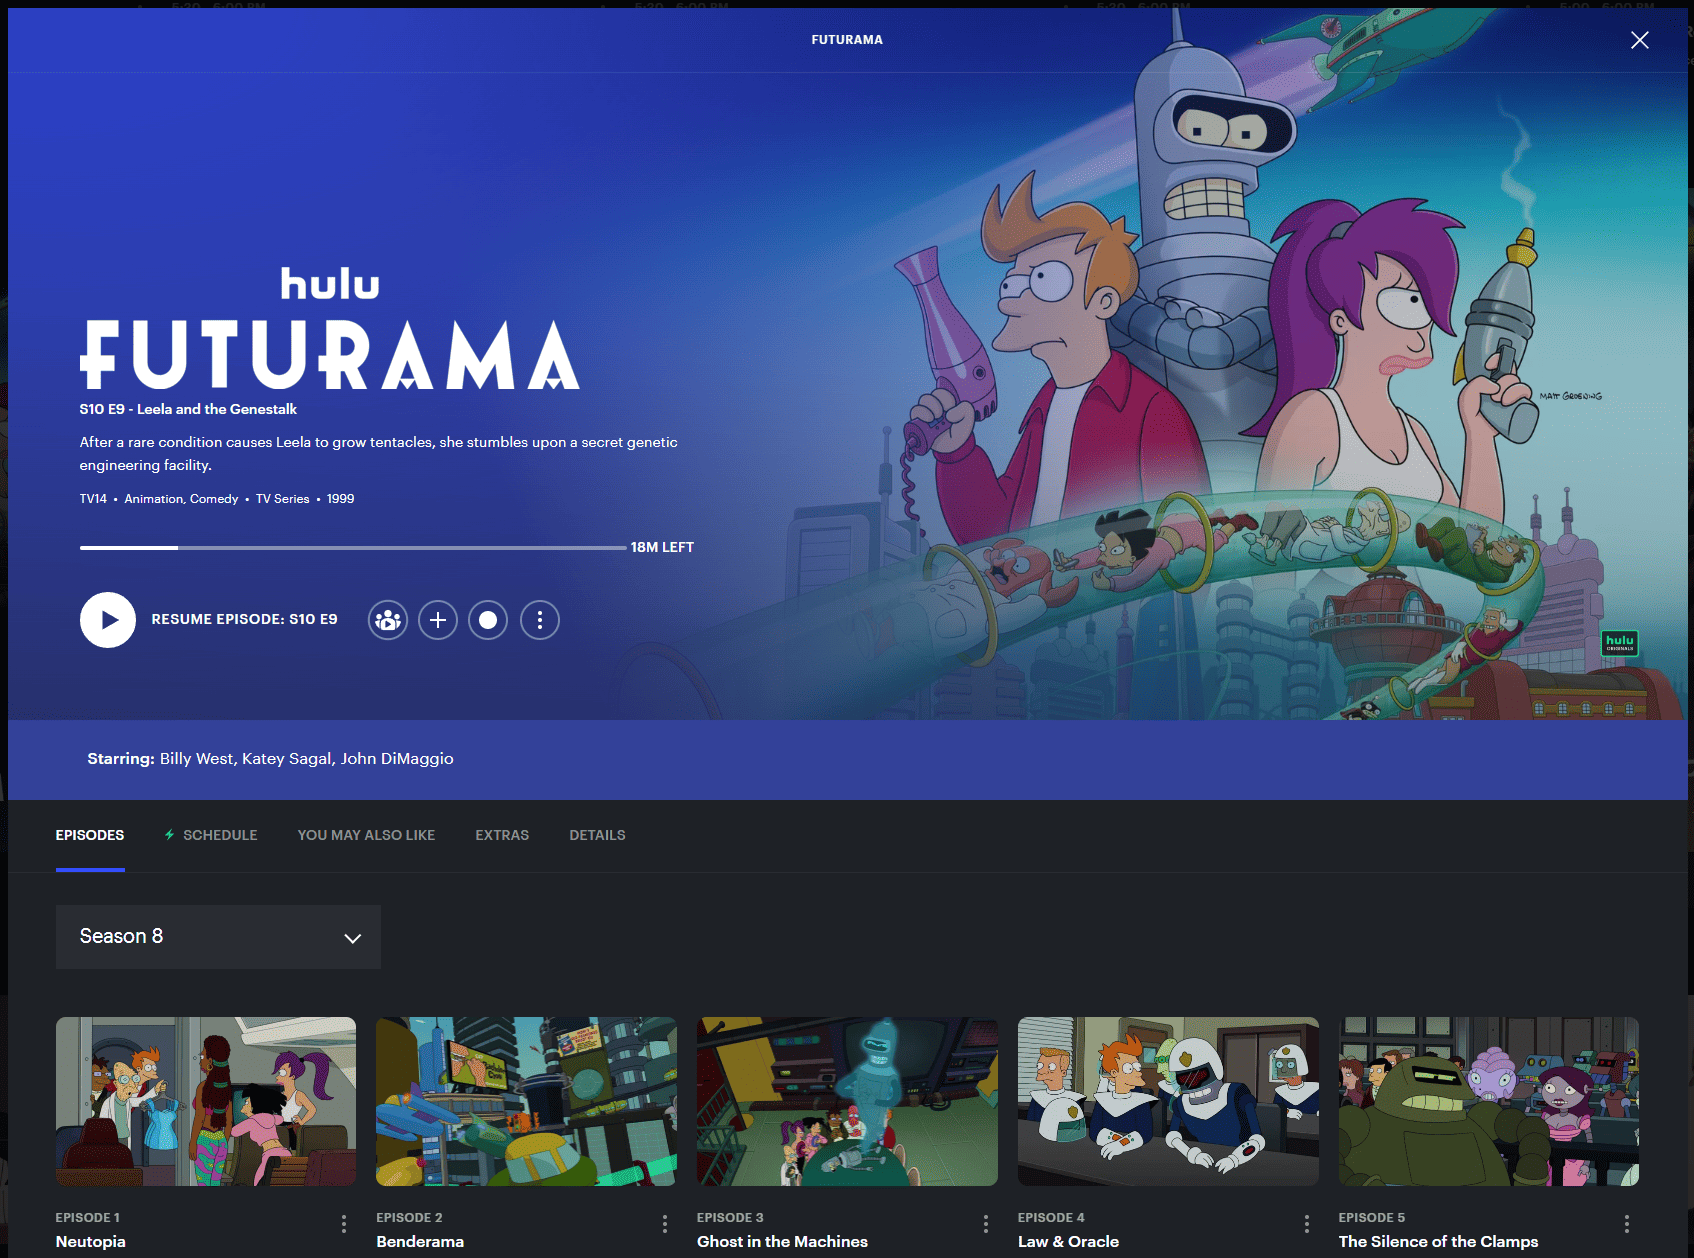 Screenshot of the “Futurama” title card with past and future episodes on Hulu